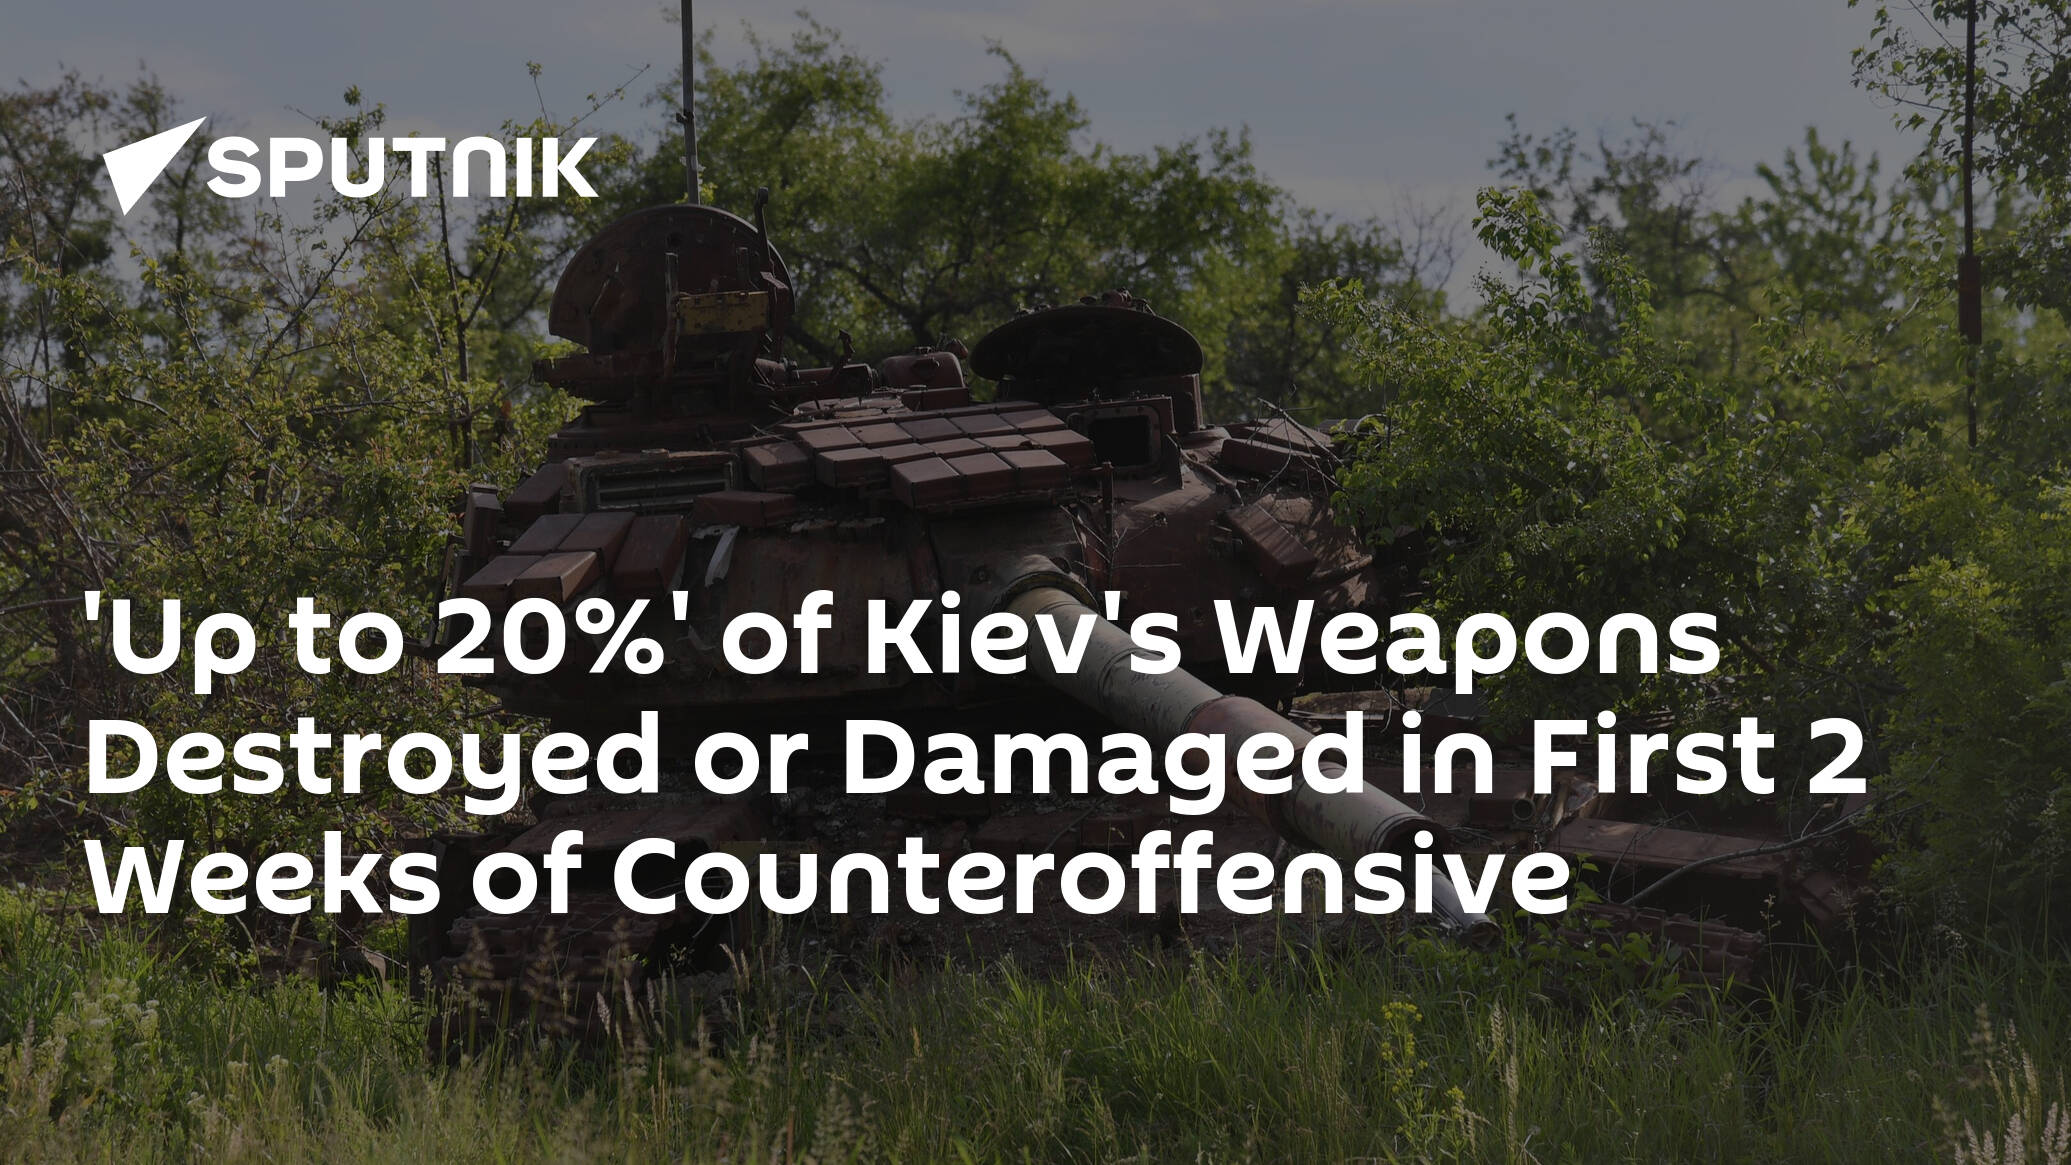 'Up to 20%' of Kiev's Weapons Destroyed or Damaged in First 2 Weeks of Counteroffensive